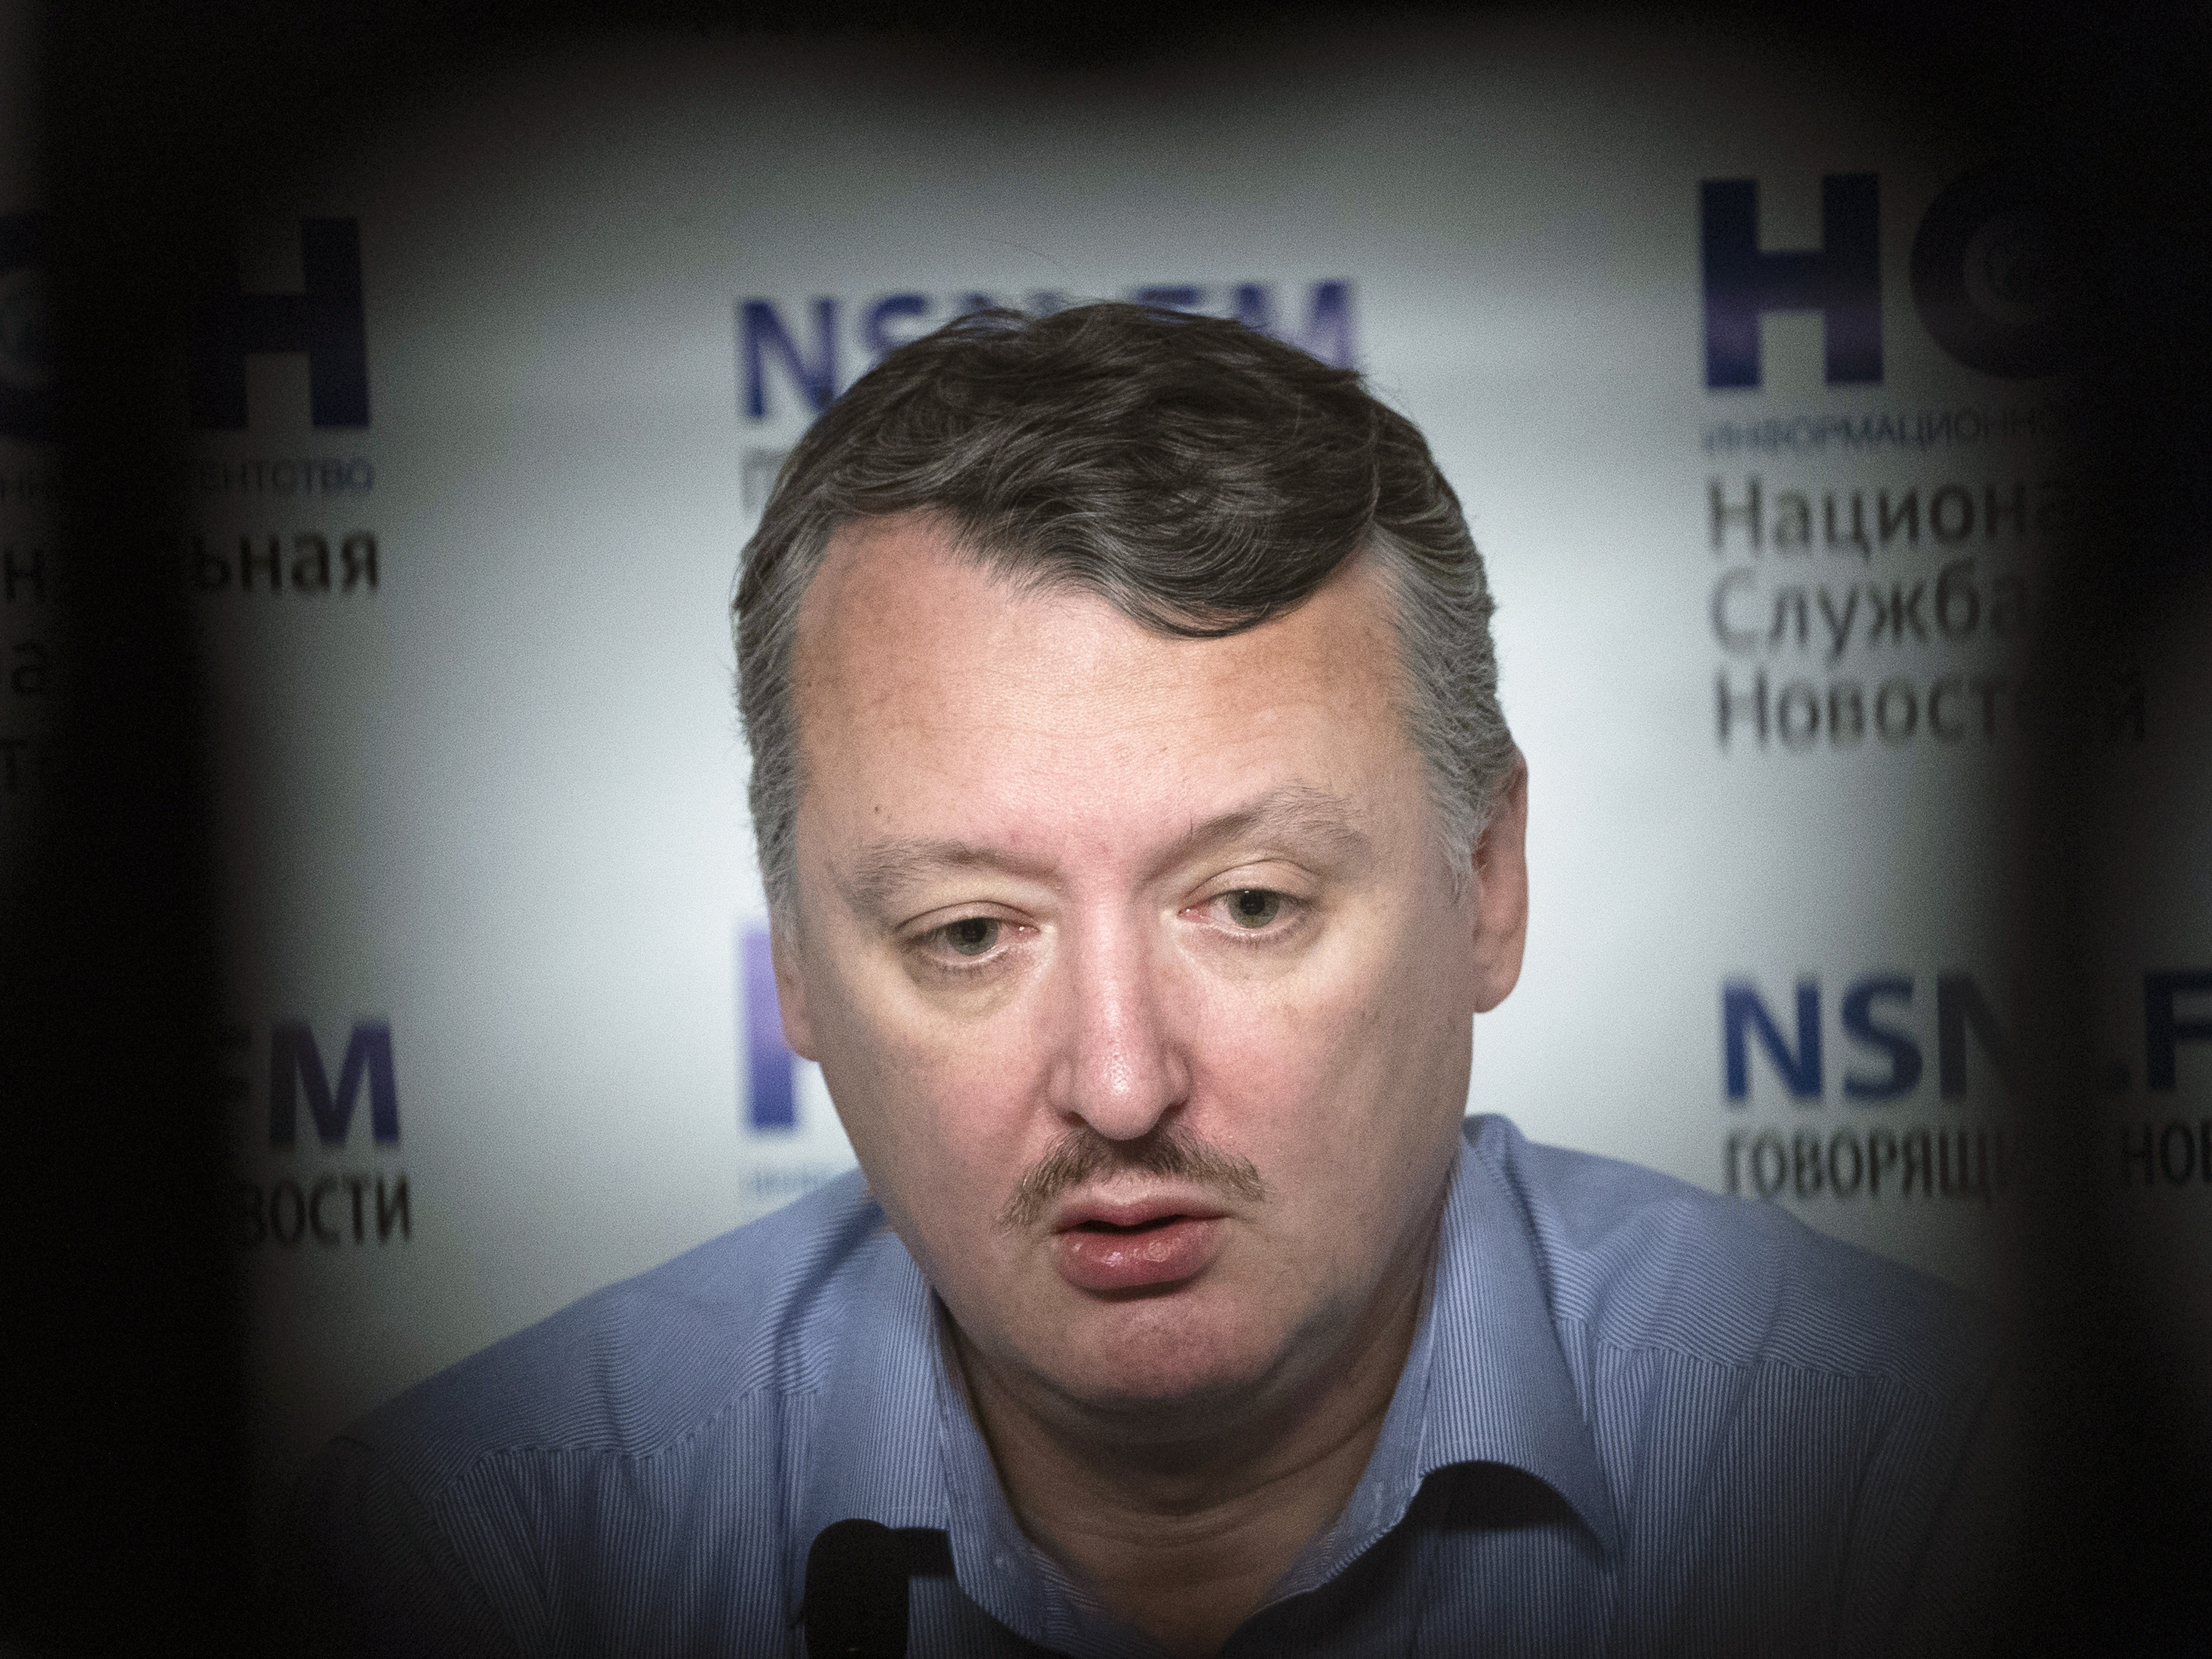 Igor Girkin, also know as Igor Strelkov, the former military chief for Russia-backed separatists in eastern Ukraine and a high-profile Russian hard-line official. Photo: AP